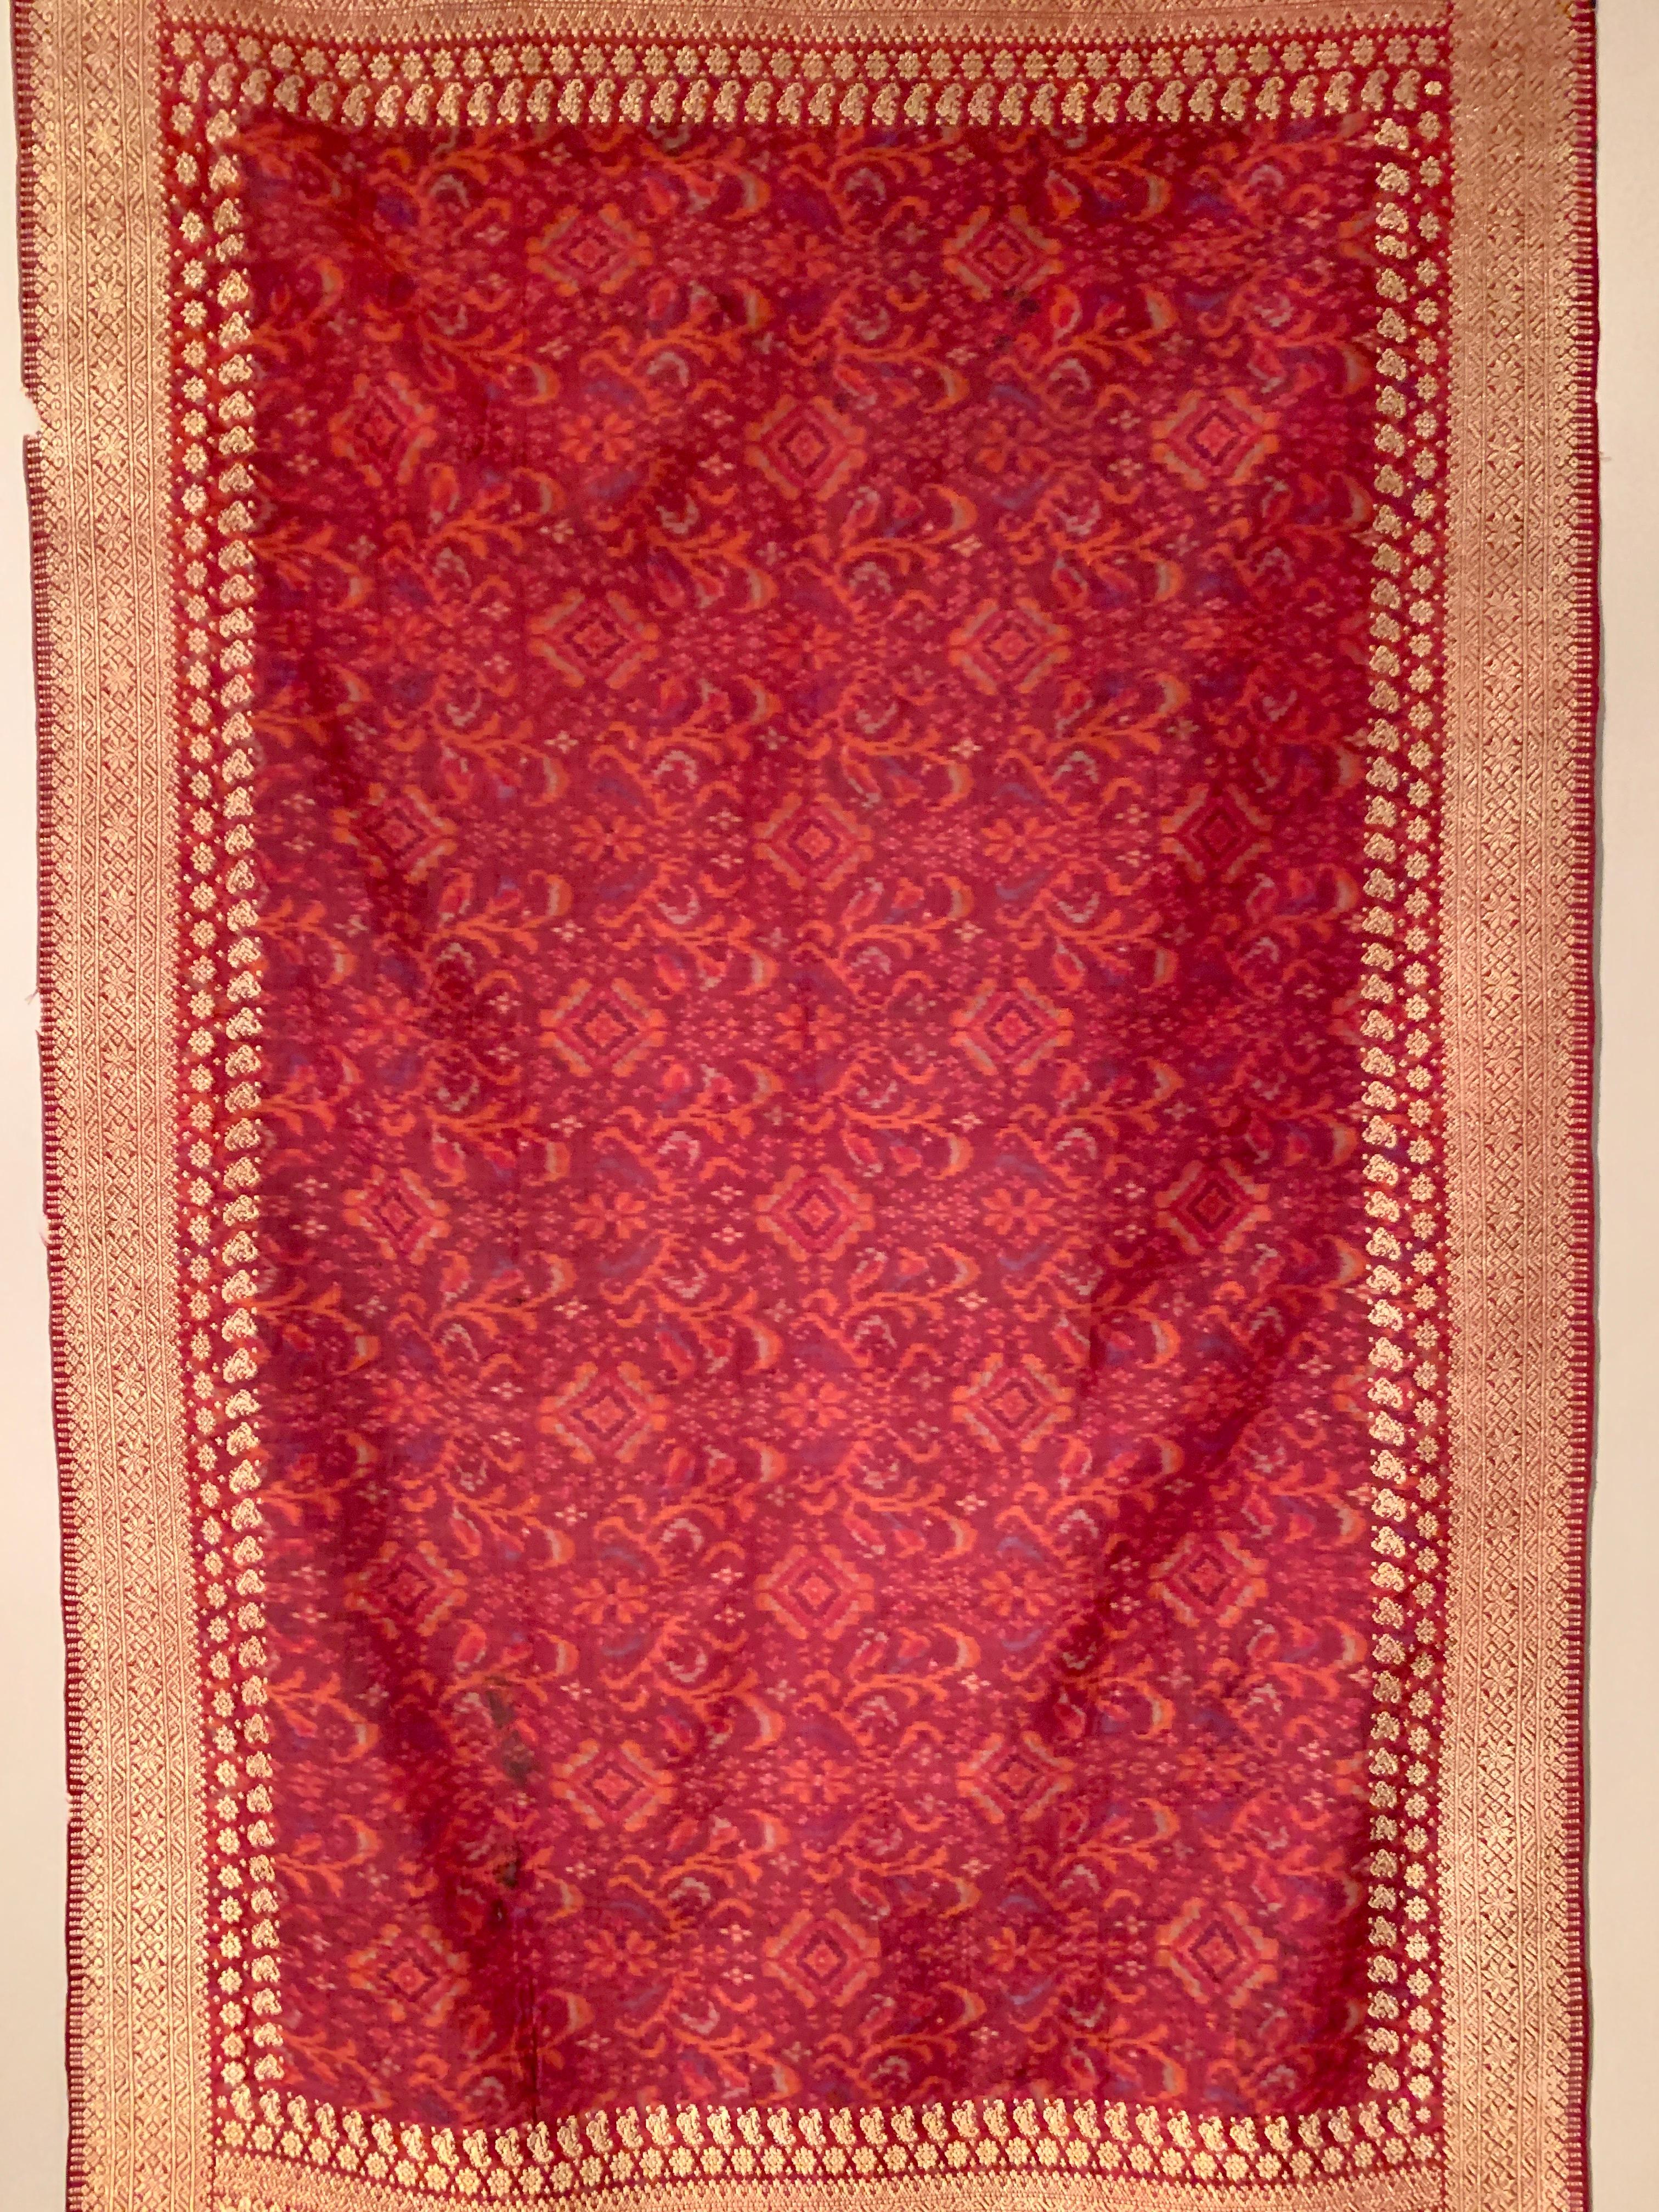 A rich and luxurious kain limar songket, shoulder cloth for a woman, ikat dyed and woven silk (limar) with supplementary weft woven metallic gold thread brocade (songket), circa 1900 or earlier, Palembang, Sumatra, Indonesia. 

This stunning